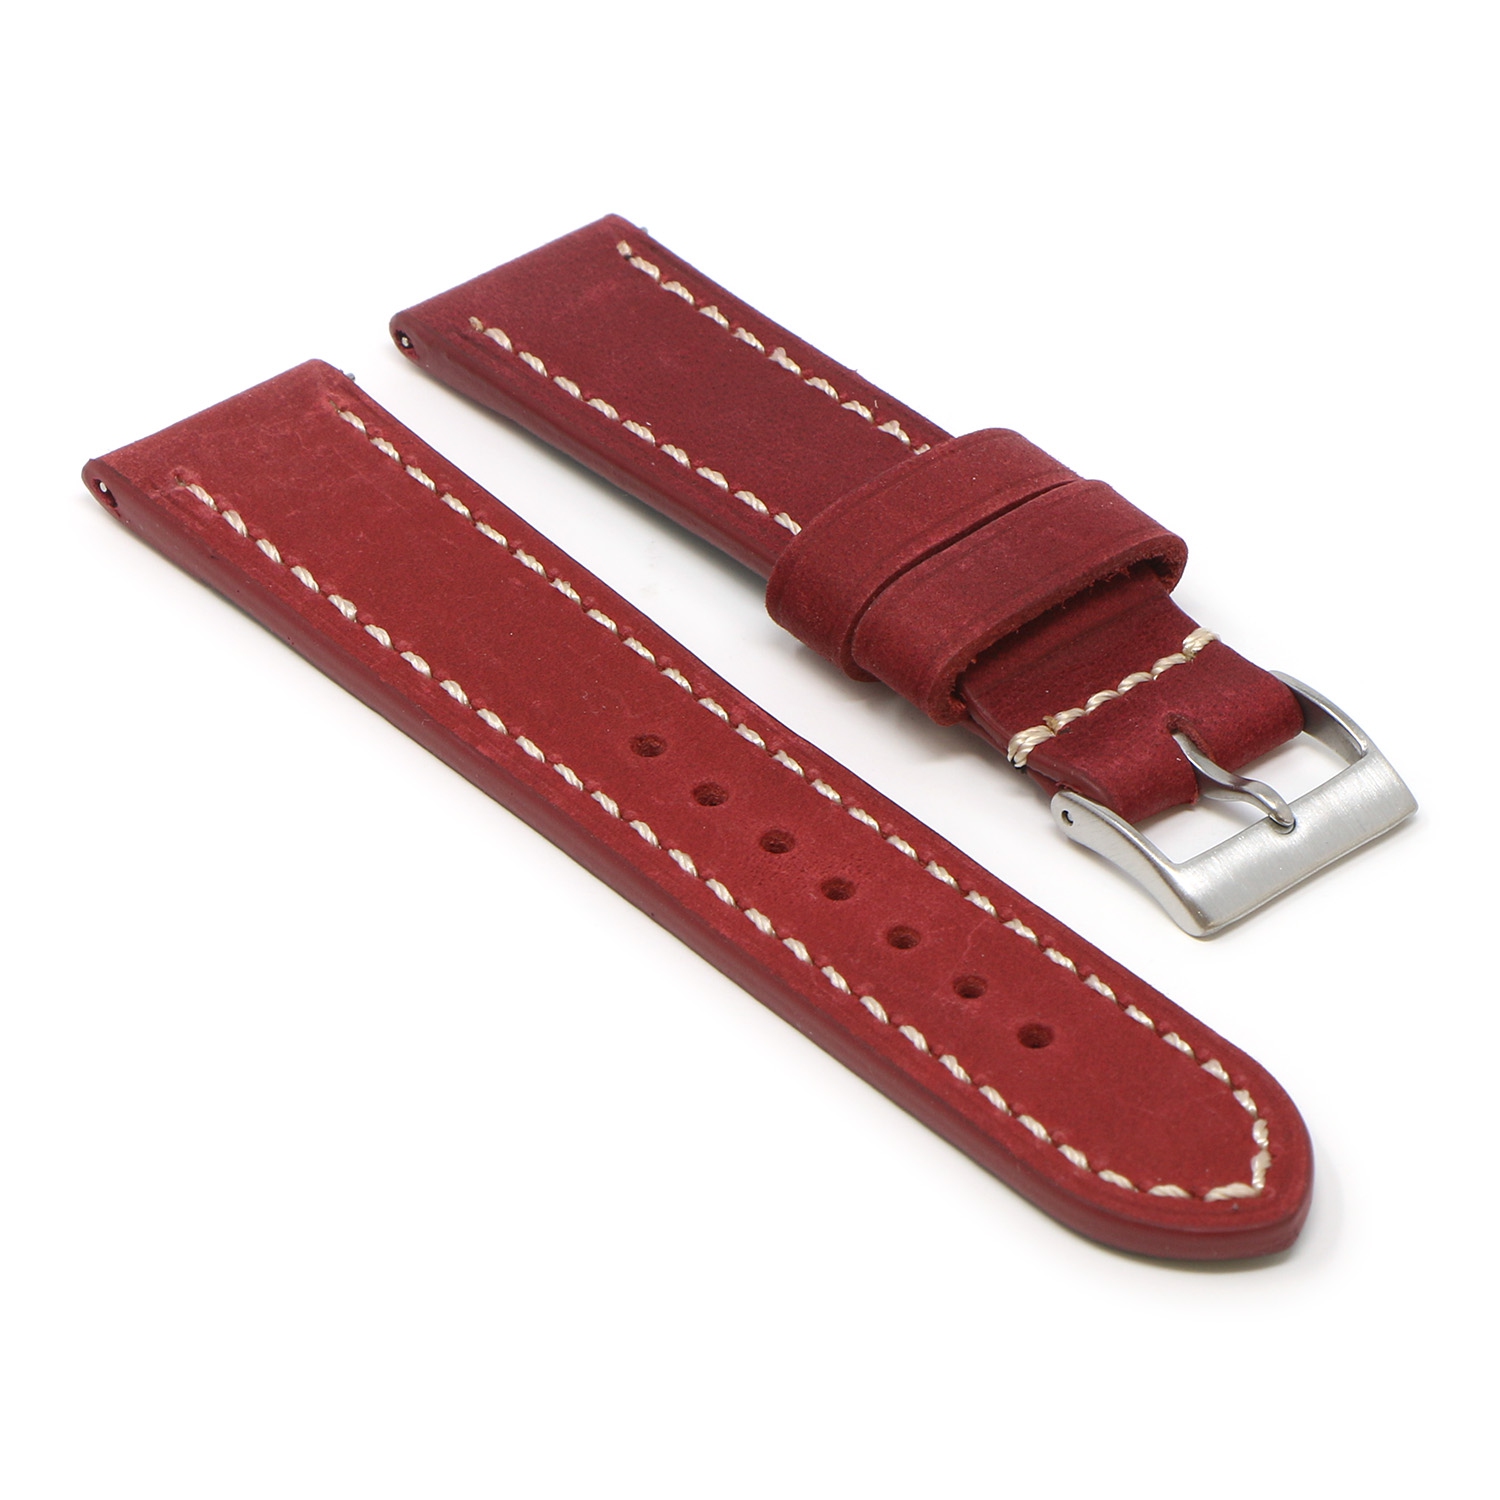 StrapsCo Vintage Leather Watch Band Strap (Short, Standard, Long) for Fitbit Charge 4 & Charge 3 - Long - Bordeaux